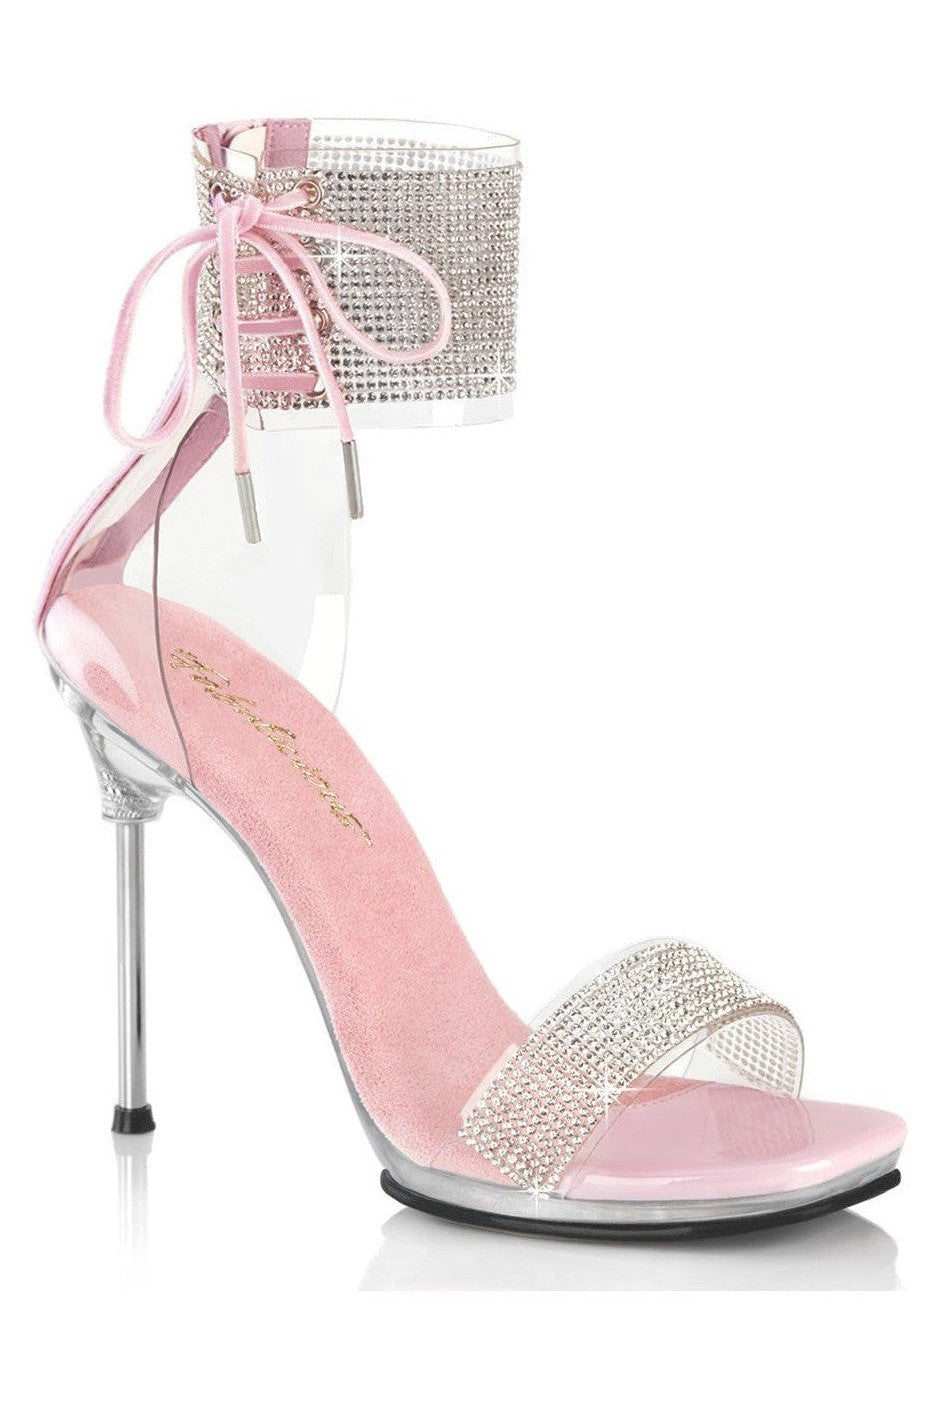 Fabulicious Clear Sandals Platform Stripper Shoes | Buy at Sexyshoes.com